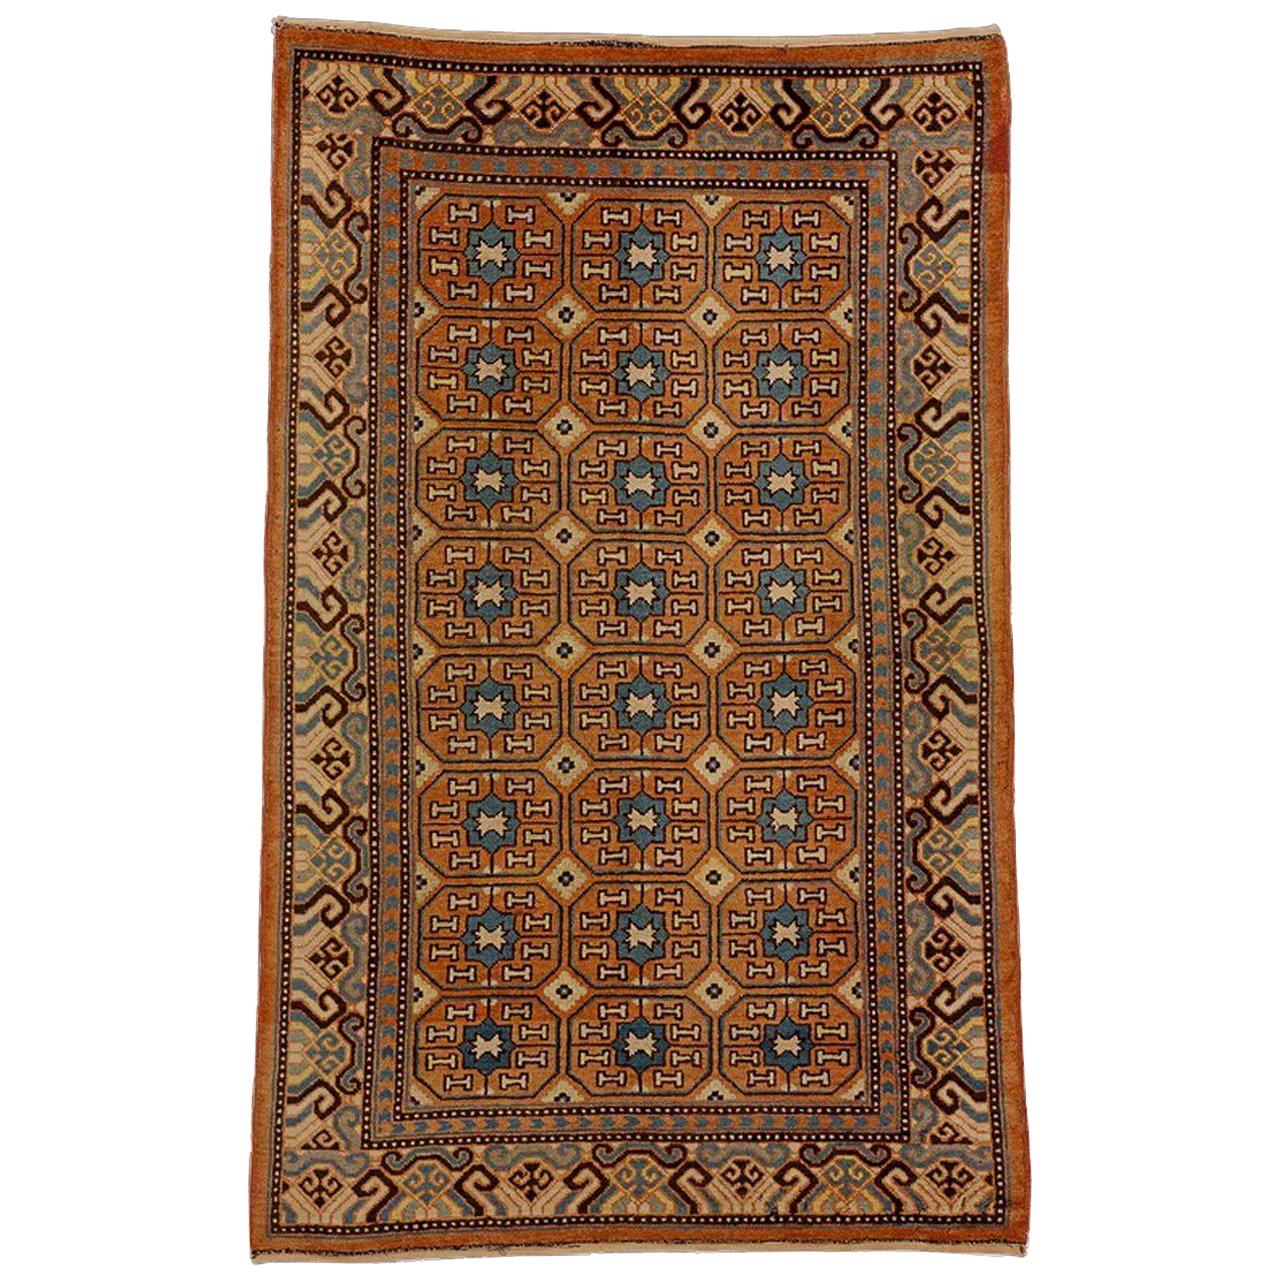 19th Century Brown and Blue Stylized Rosette Gul Chinese Khotan Rug, circa 1870s For Sale